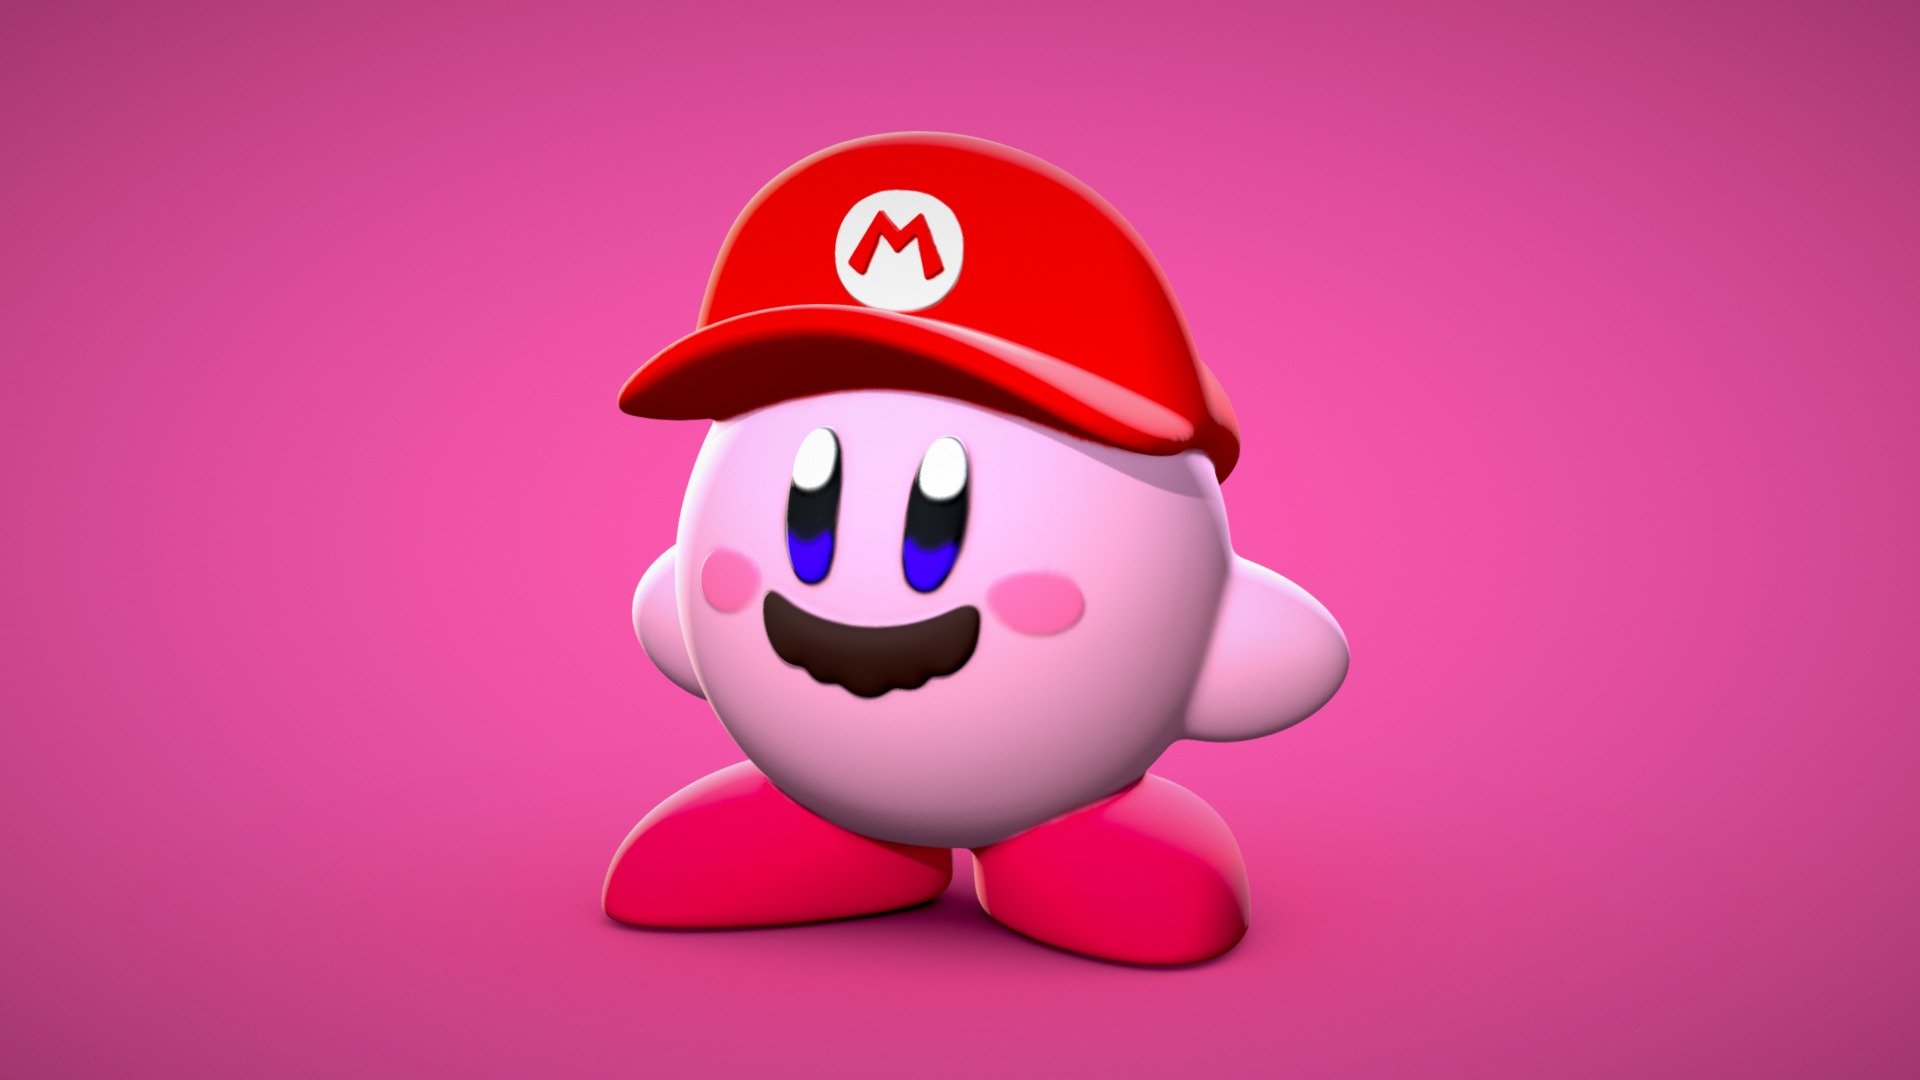 Kirby Transformed into Mario

Gallery

  

This model is part of the Kirby/Mario crossover collection. See other models from this collection:




Mario Kirby: https://skfb.ly/o986y

Luigi Kirby: https://skfb.ly/ounWs

Princess Peach Kirby : https://skfb.ly/oupnF

Bowser Kirby: https://skfb.ly/ou6X7

Render images:
https://www.instagram.com/lessab3d/ - Mario Kirby - 3D print model - Buy Royalty Free 3D model by LessaB3D (@thiagolessa90) 3d model